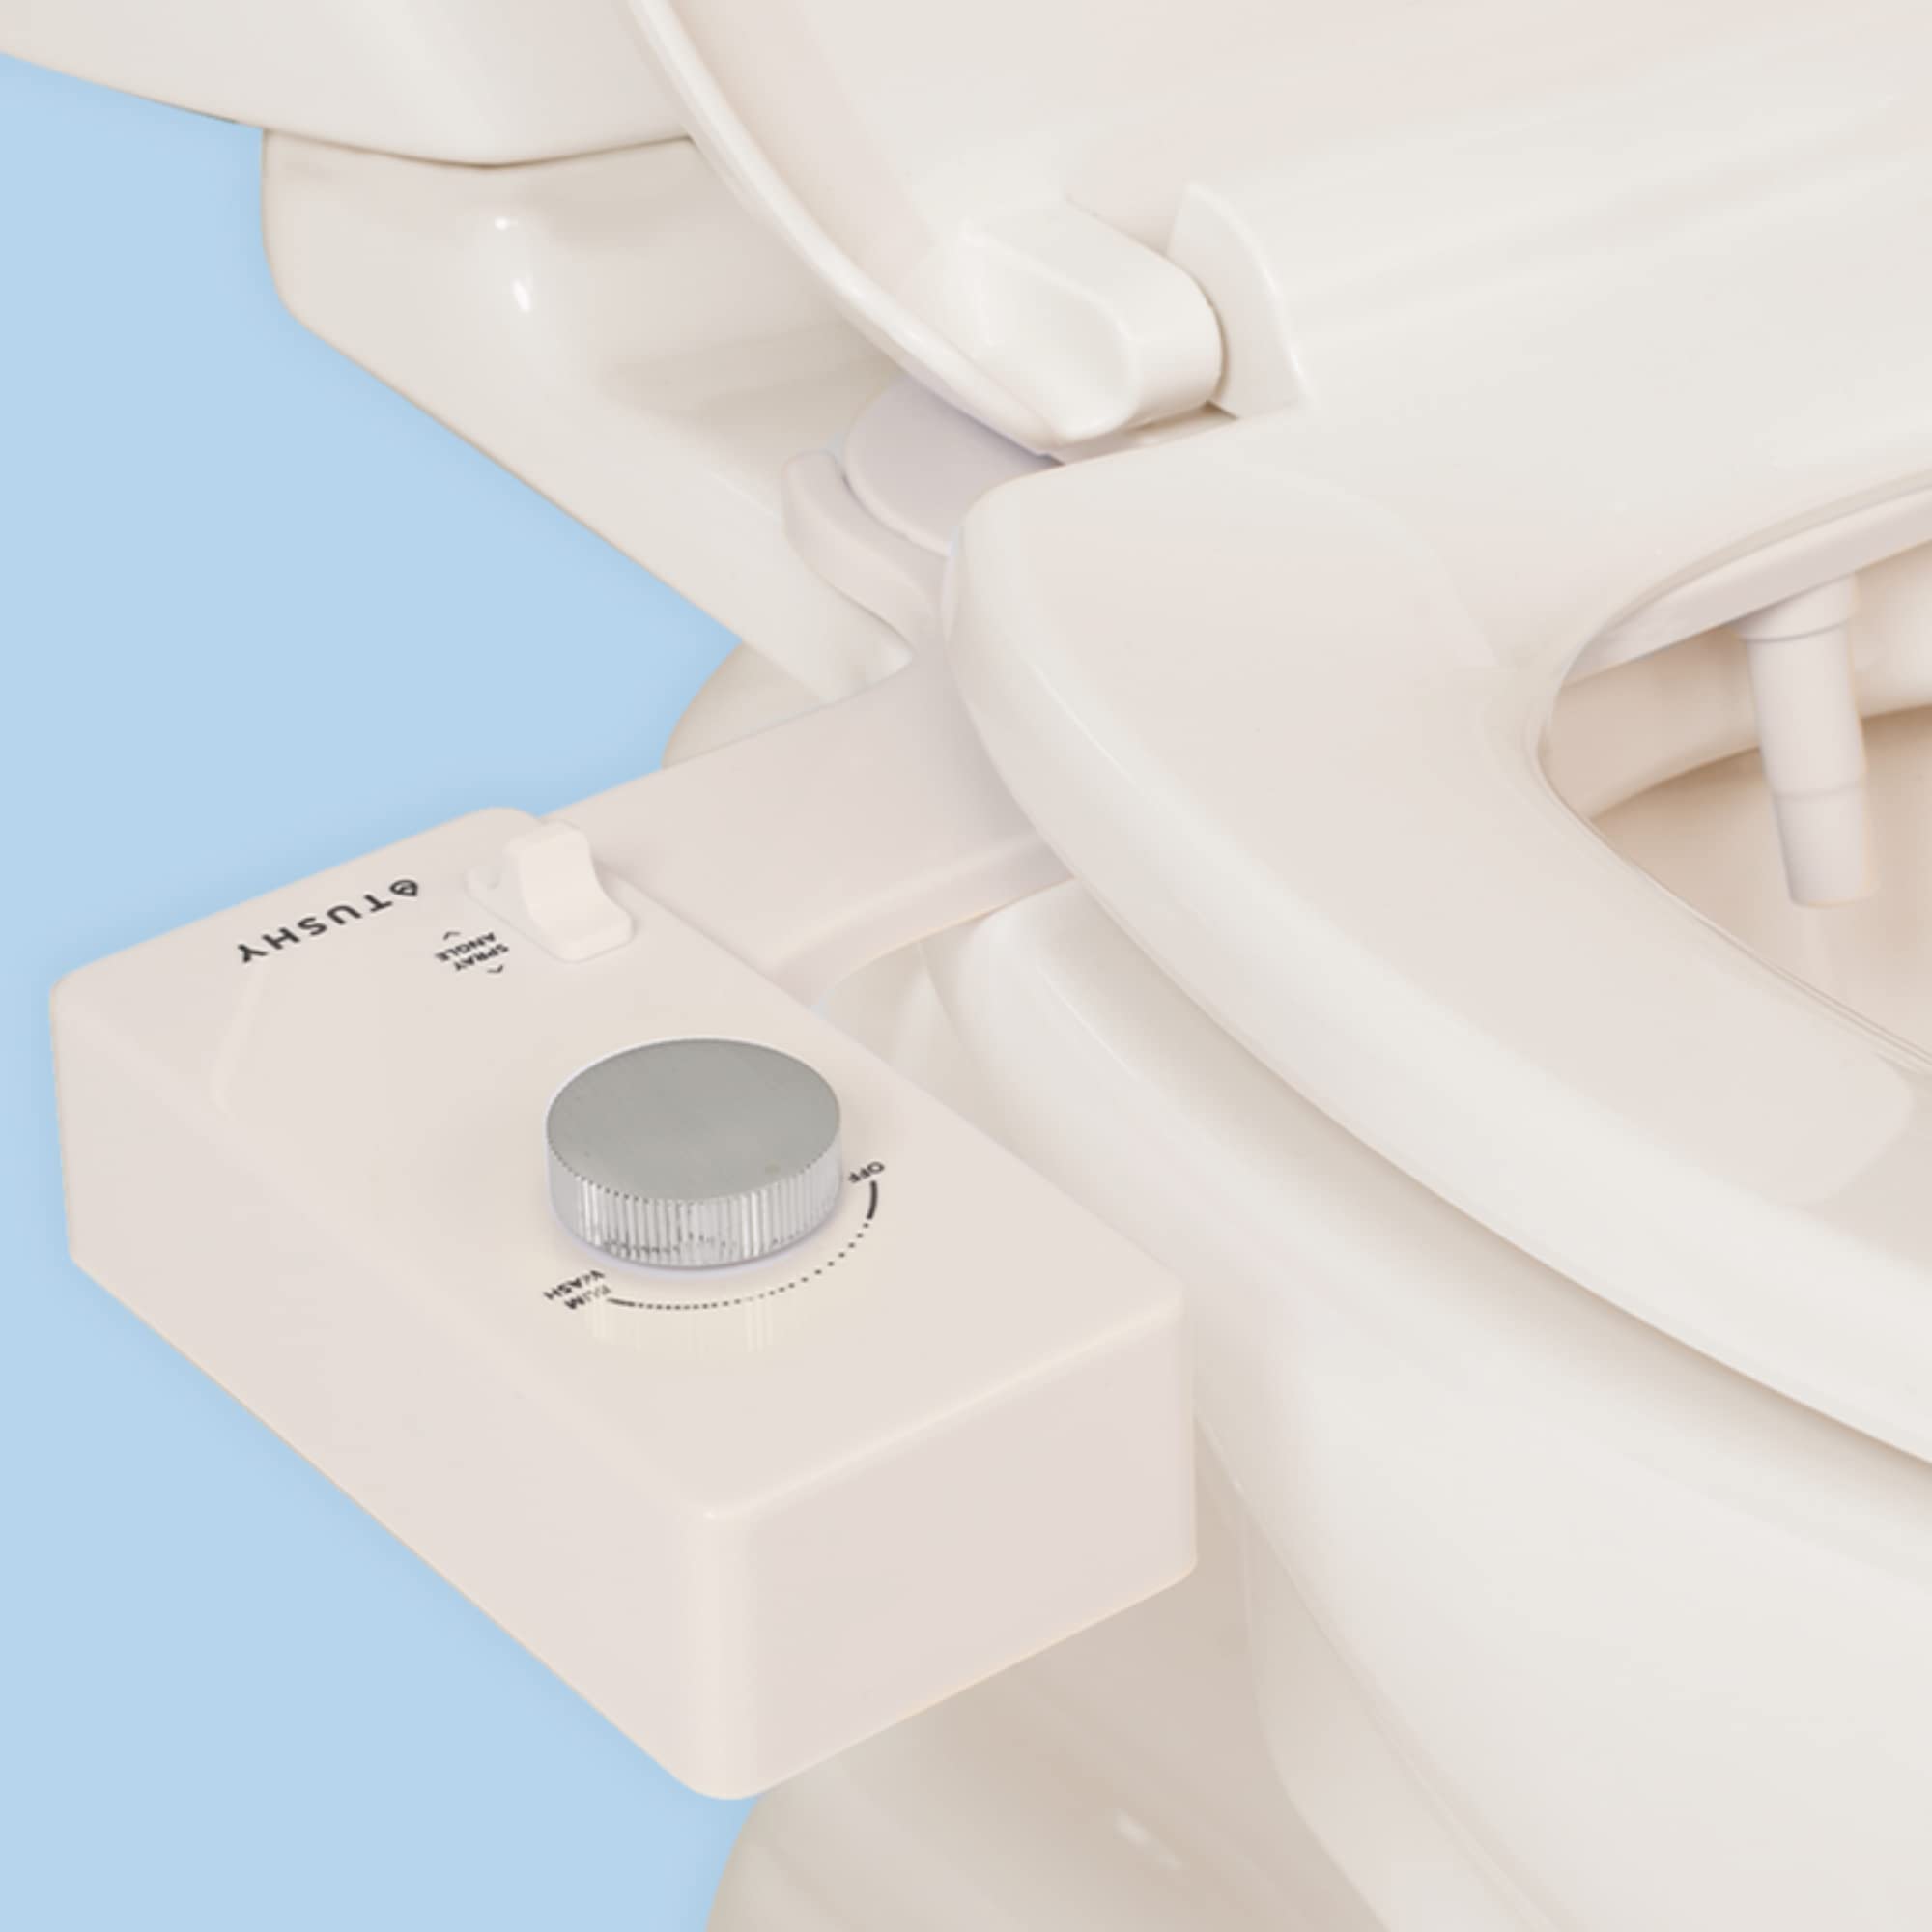 TUSHY Classic 3.0 Bidet Toilet Seat Attachment - Self Cleaning Water Sprayer +Adjustable Pressure Nozzle, Angle Control, Easy Install